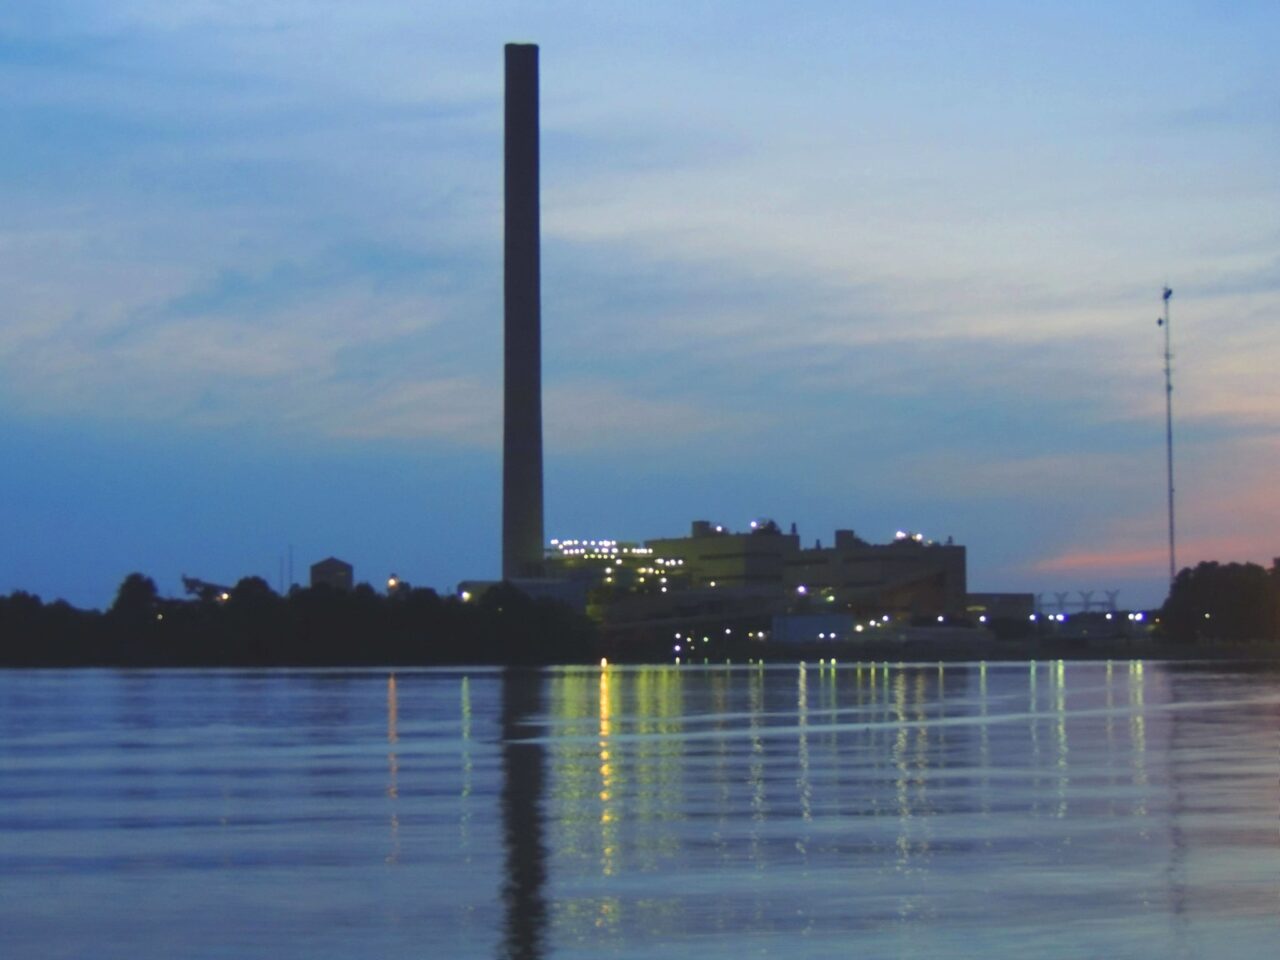 EPA Delayed on Proposed ELG Revisions for Steam Power Plants